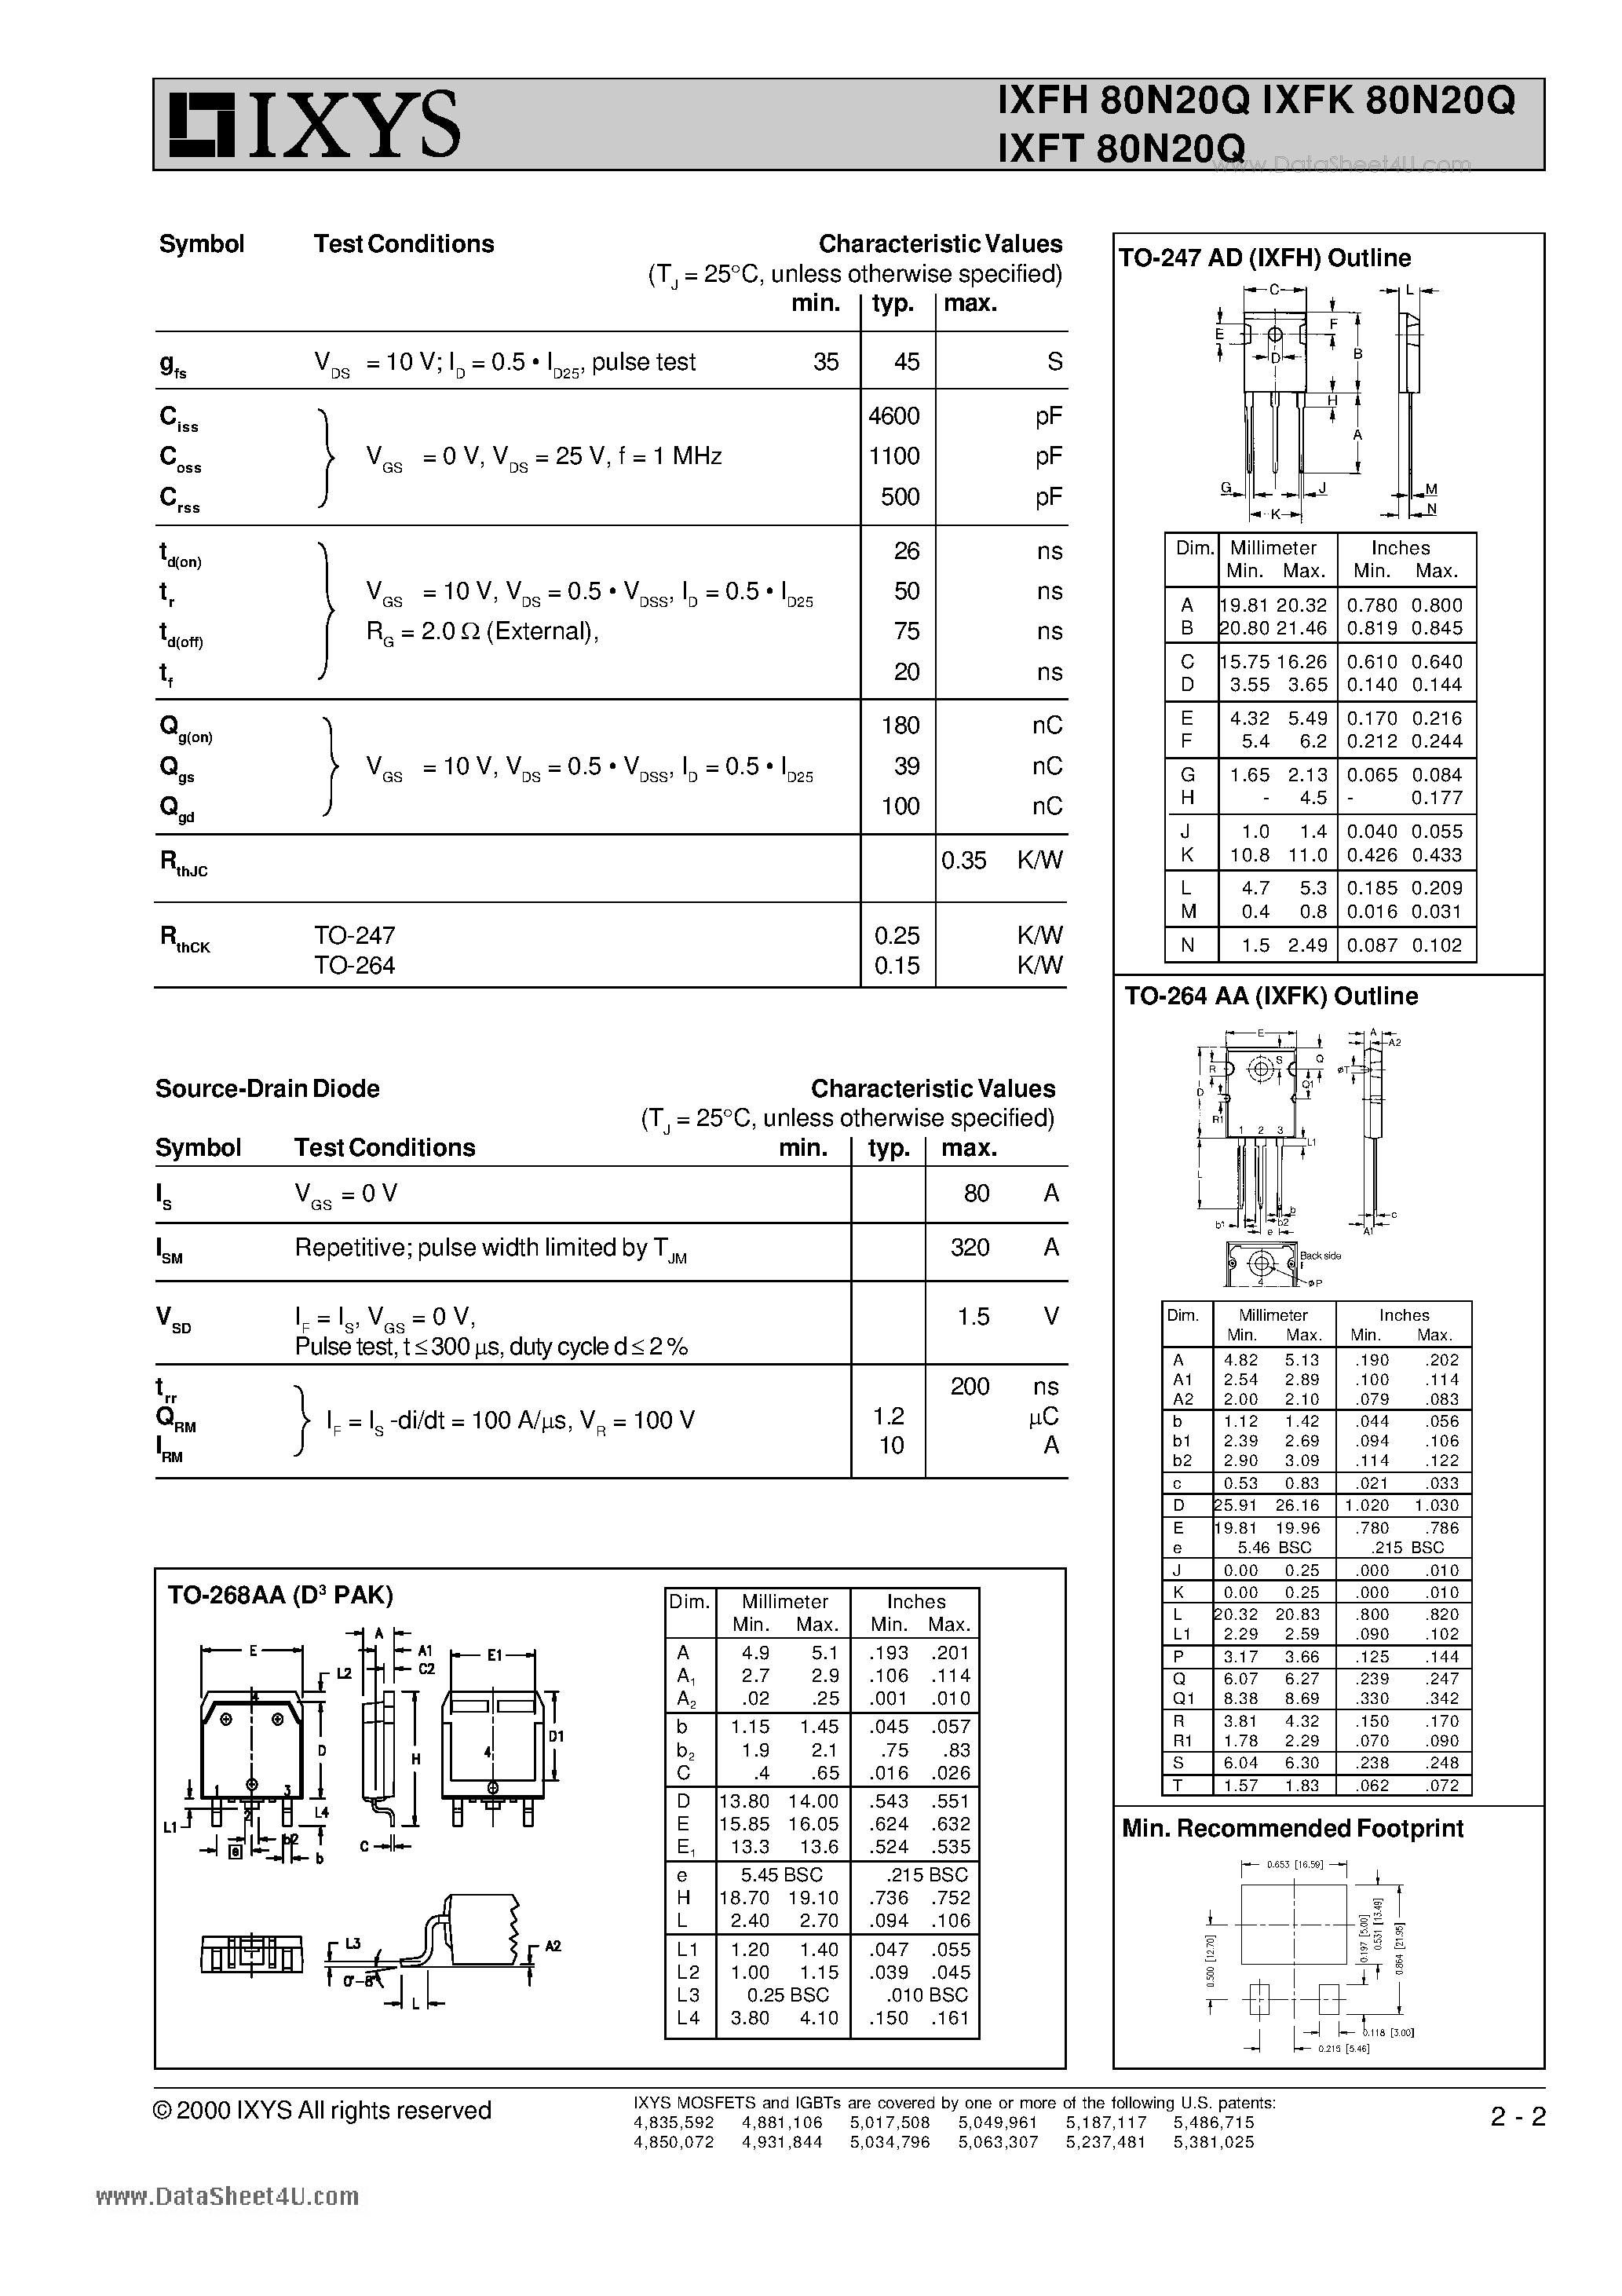 Datasheet IXFH80N20Q - Power MOSFETs Q-Class page 2